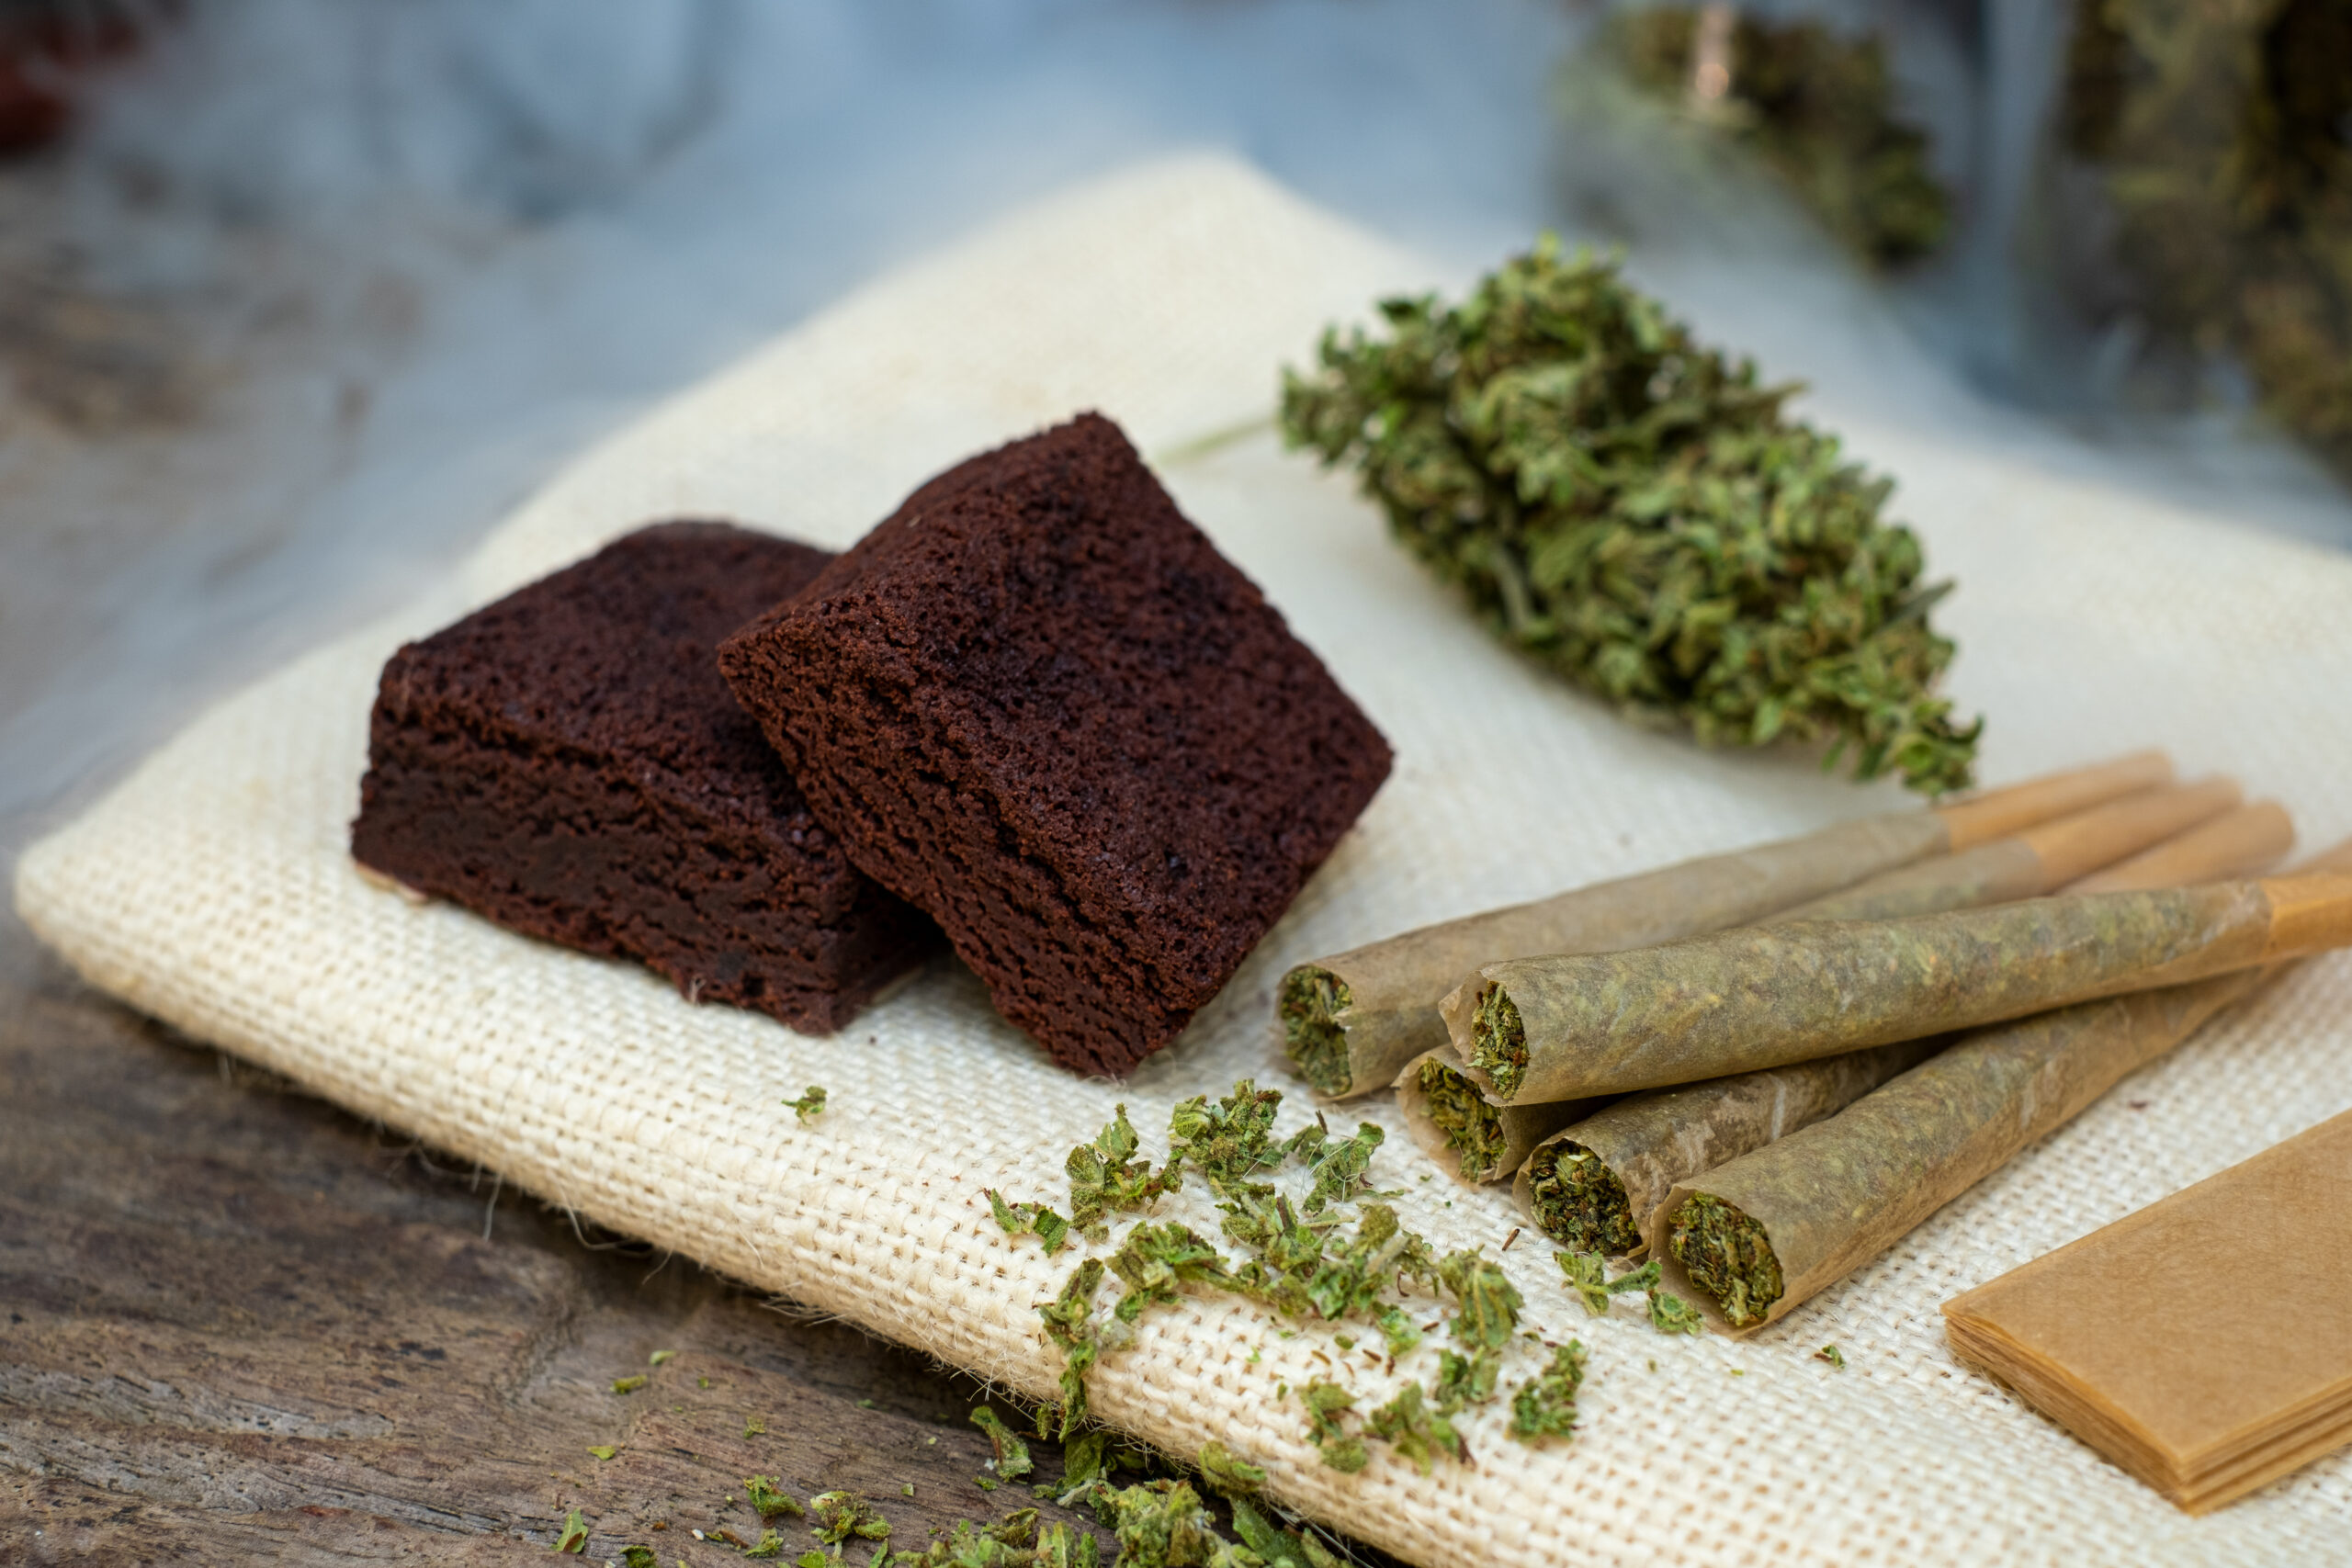 How to Make Edibles: Baking & Cooking With Cannabis